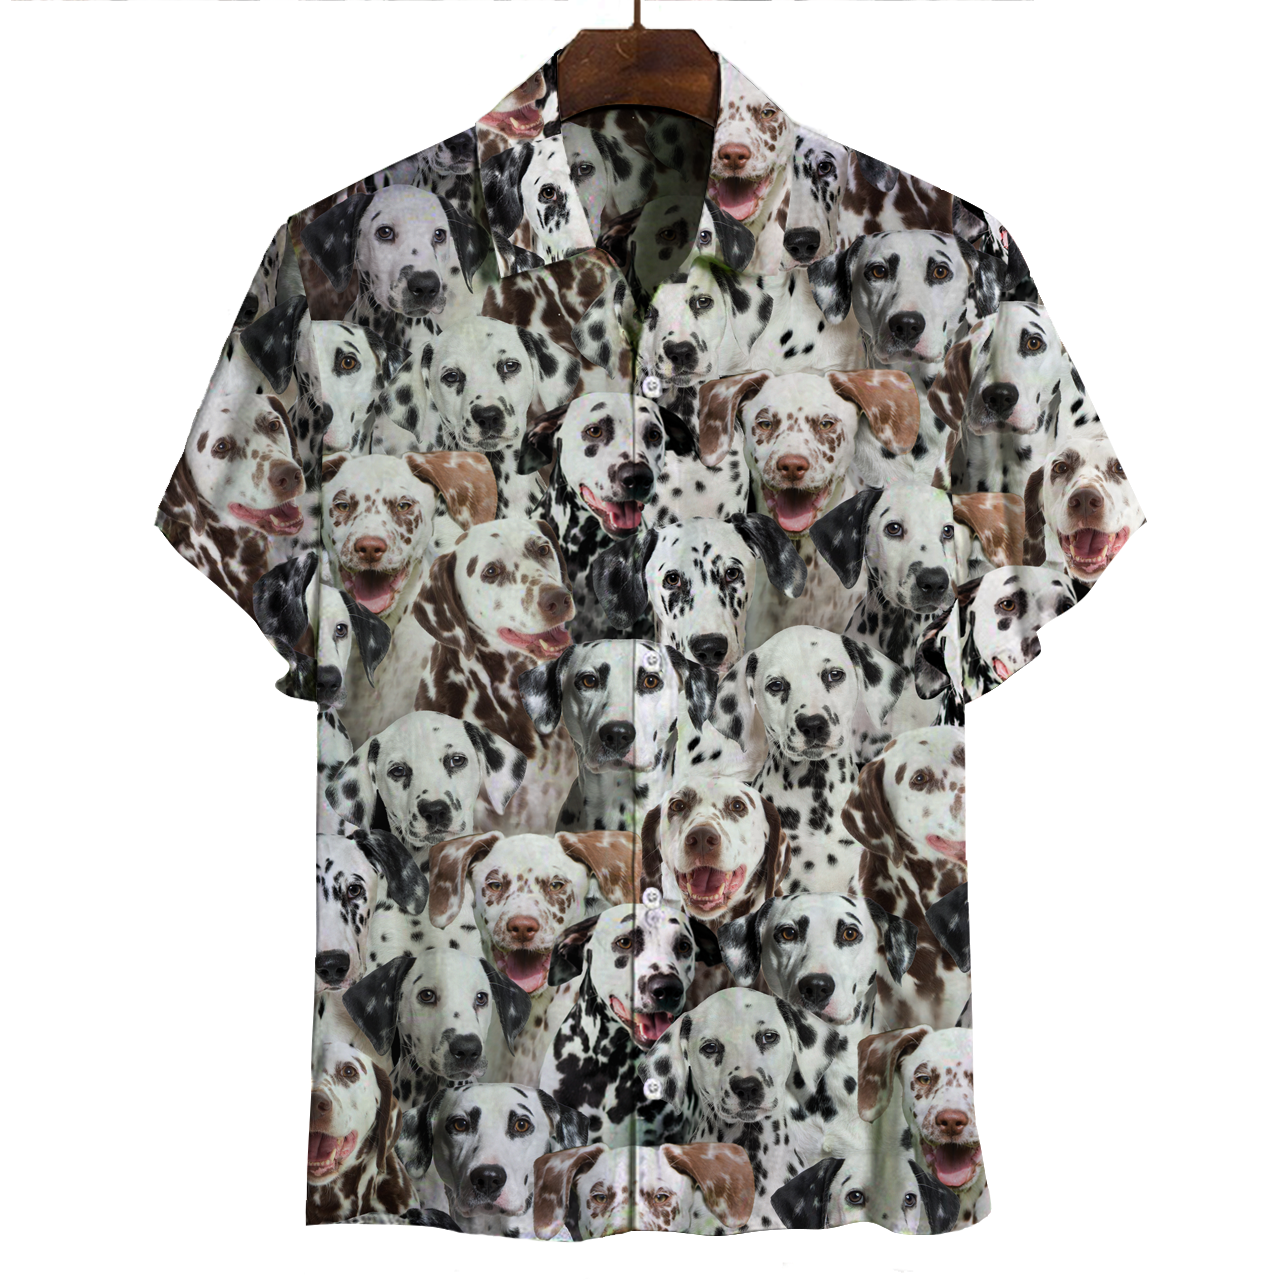 Dalmatians You Will Have A Bunch Of Dogs Hawaiian Shirt, Dalmatian Hawaiian Shirt, Aloha Shirt For Dog Lover